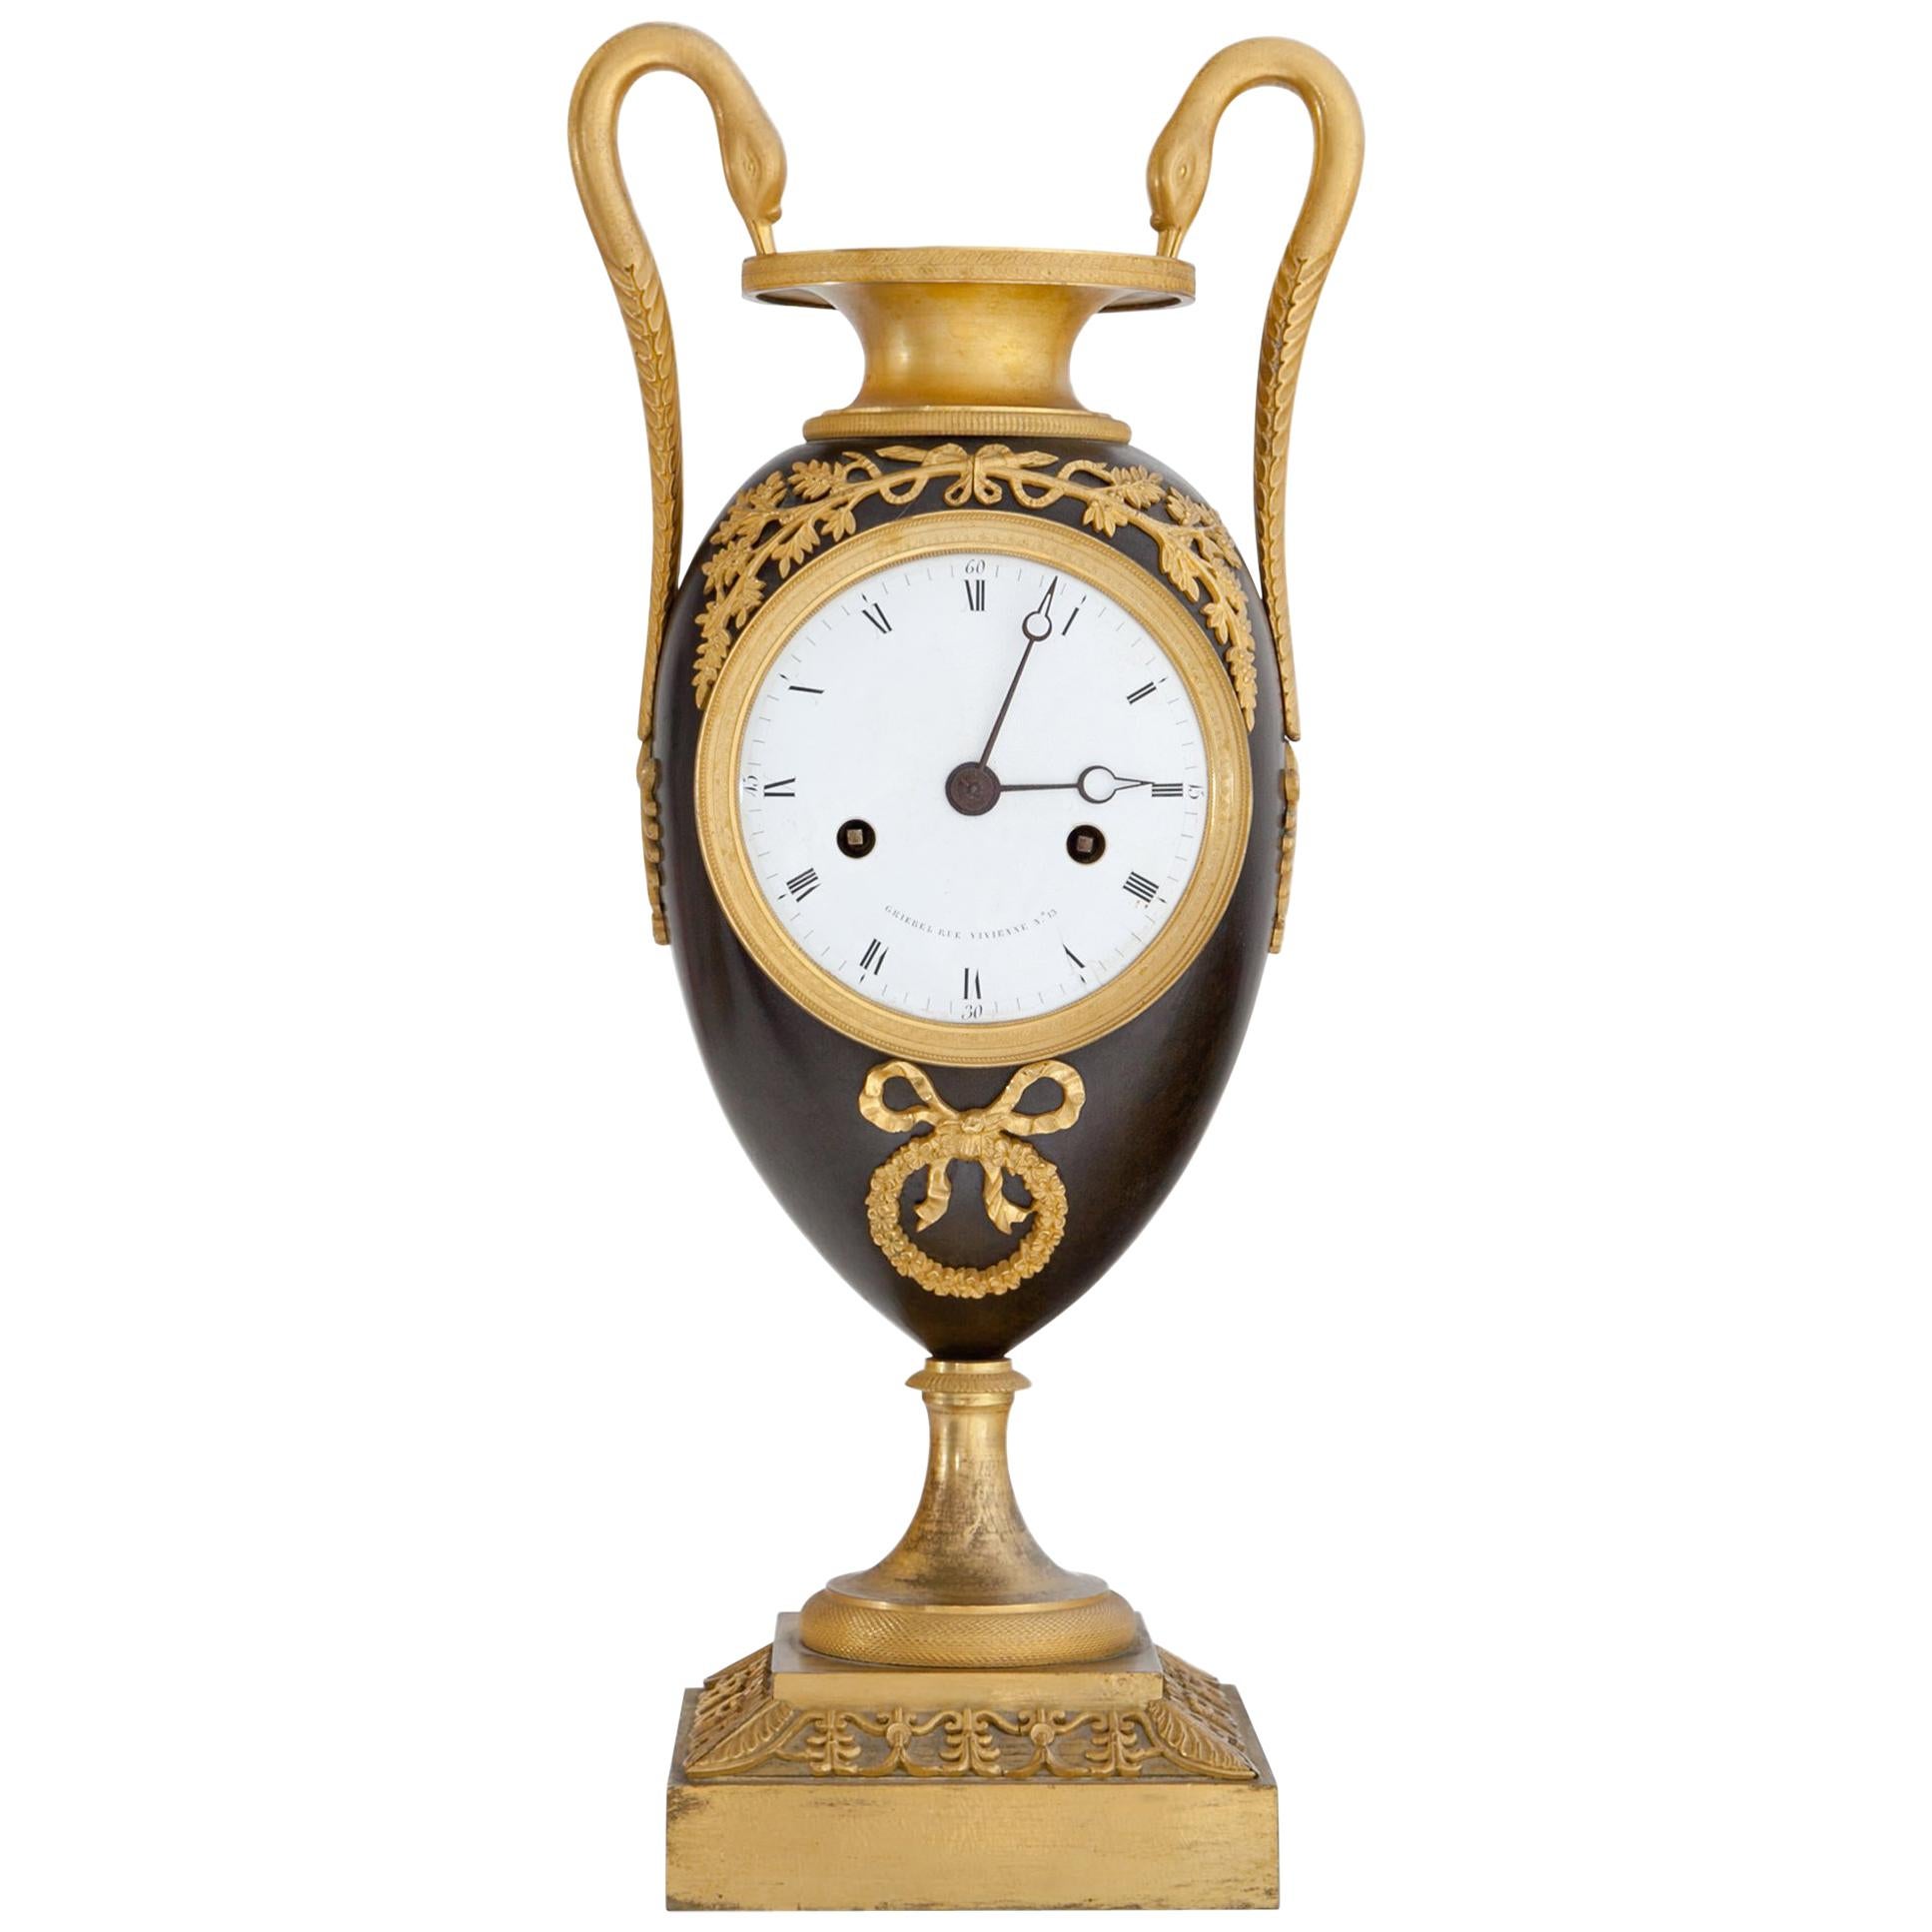 Empire Clock, Signed Griebel, France, First Quarter of the 19th Century